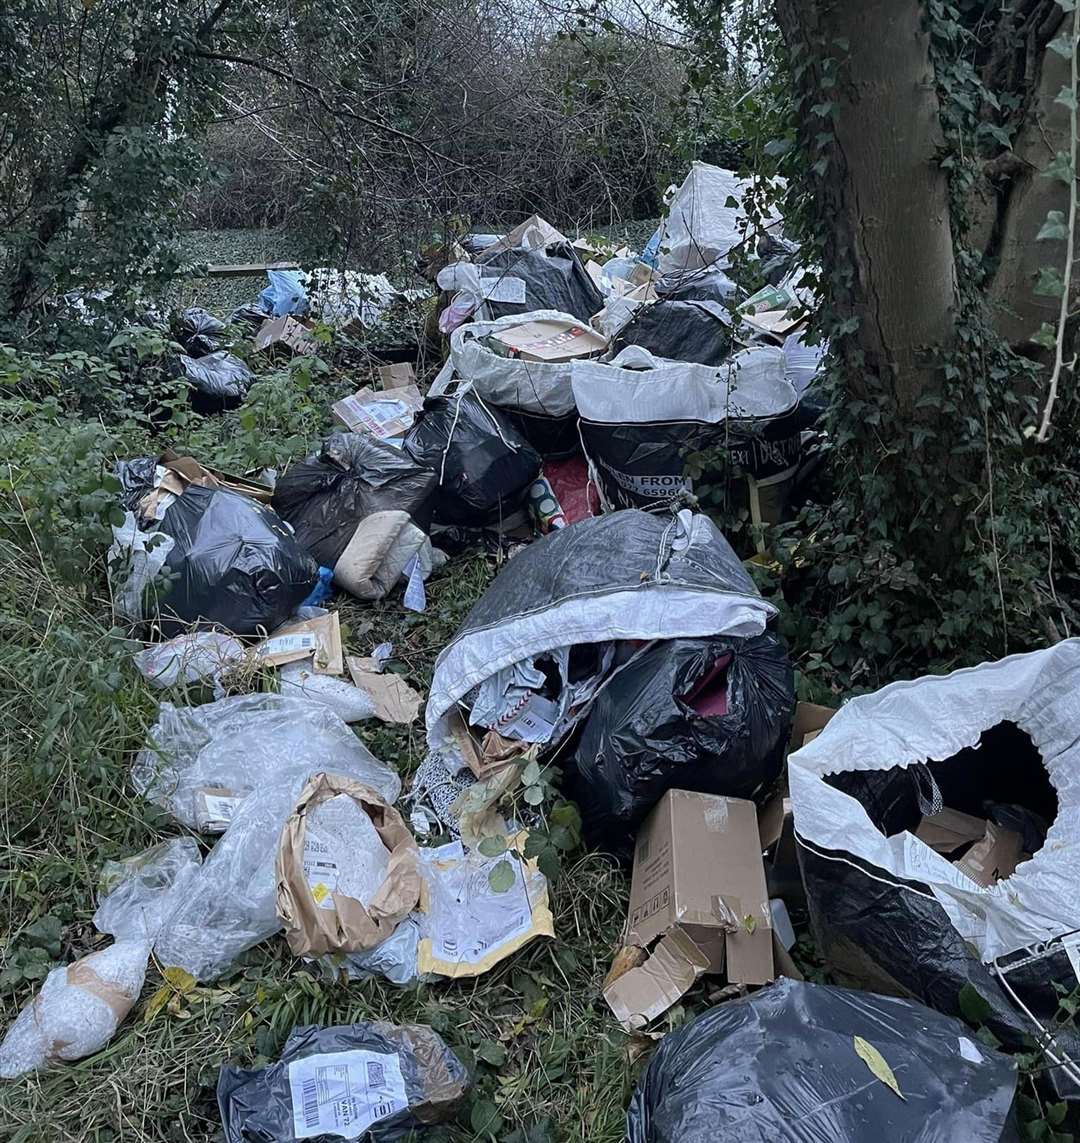 A man has been released without charge after several Hermes/Evri parcels were found dumped at the end of Beacon Road, Chatham. Photo: Wayne Coveney